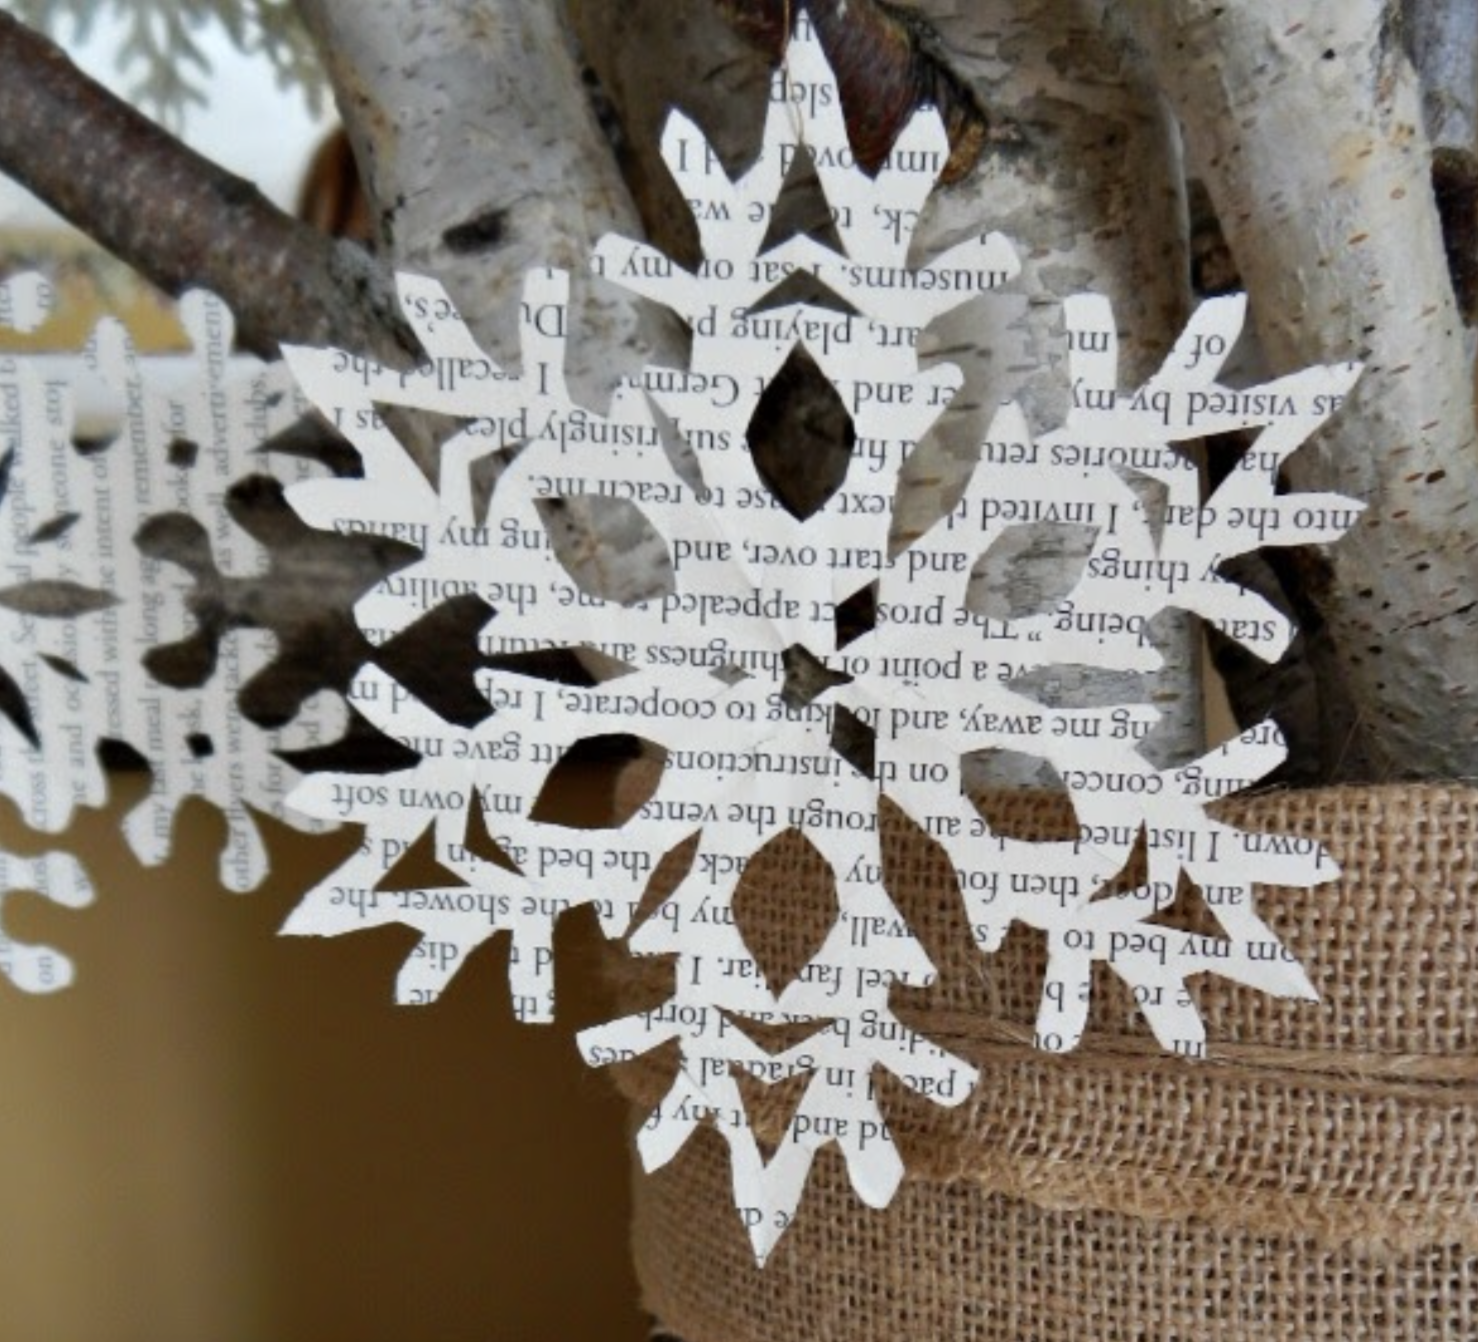 5 Easy Holiday Crafts